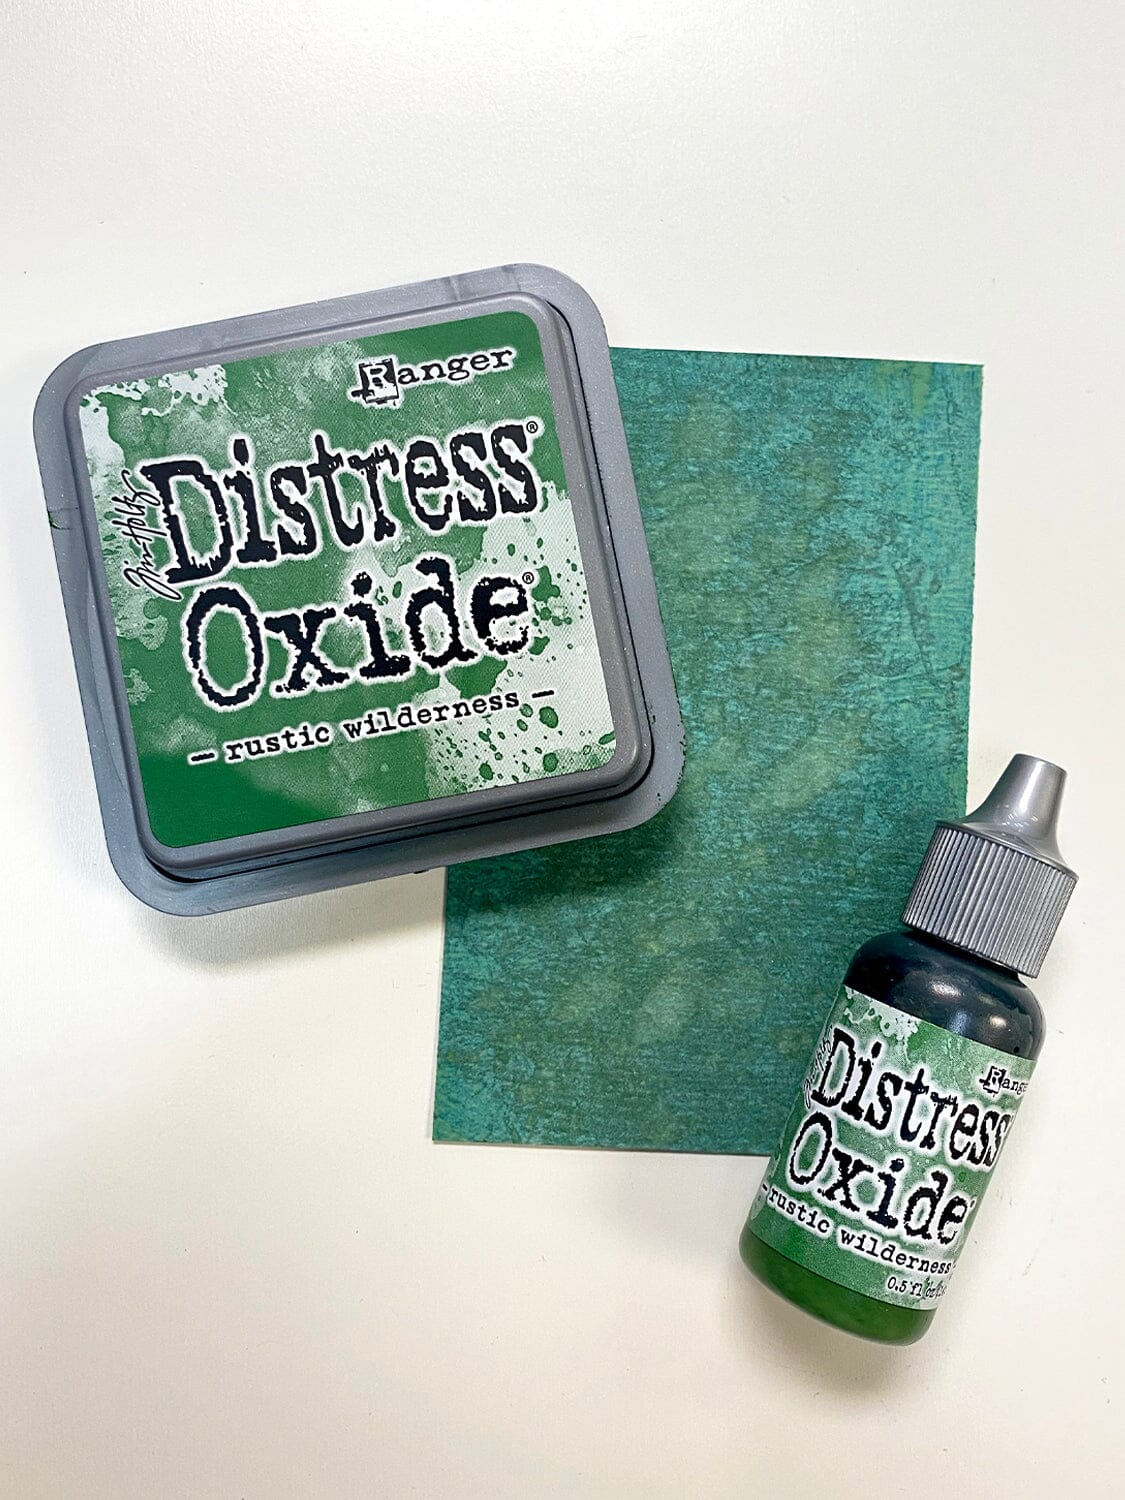 New Distress Color: Rustic Wilderness {creative chick}